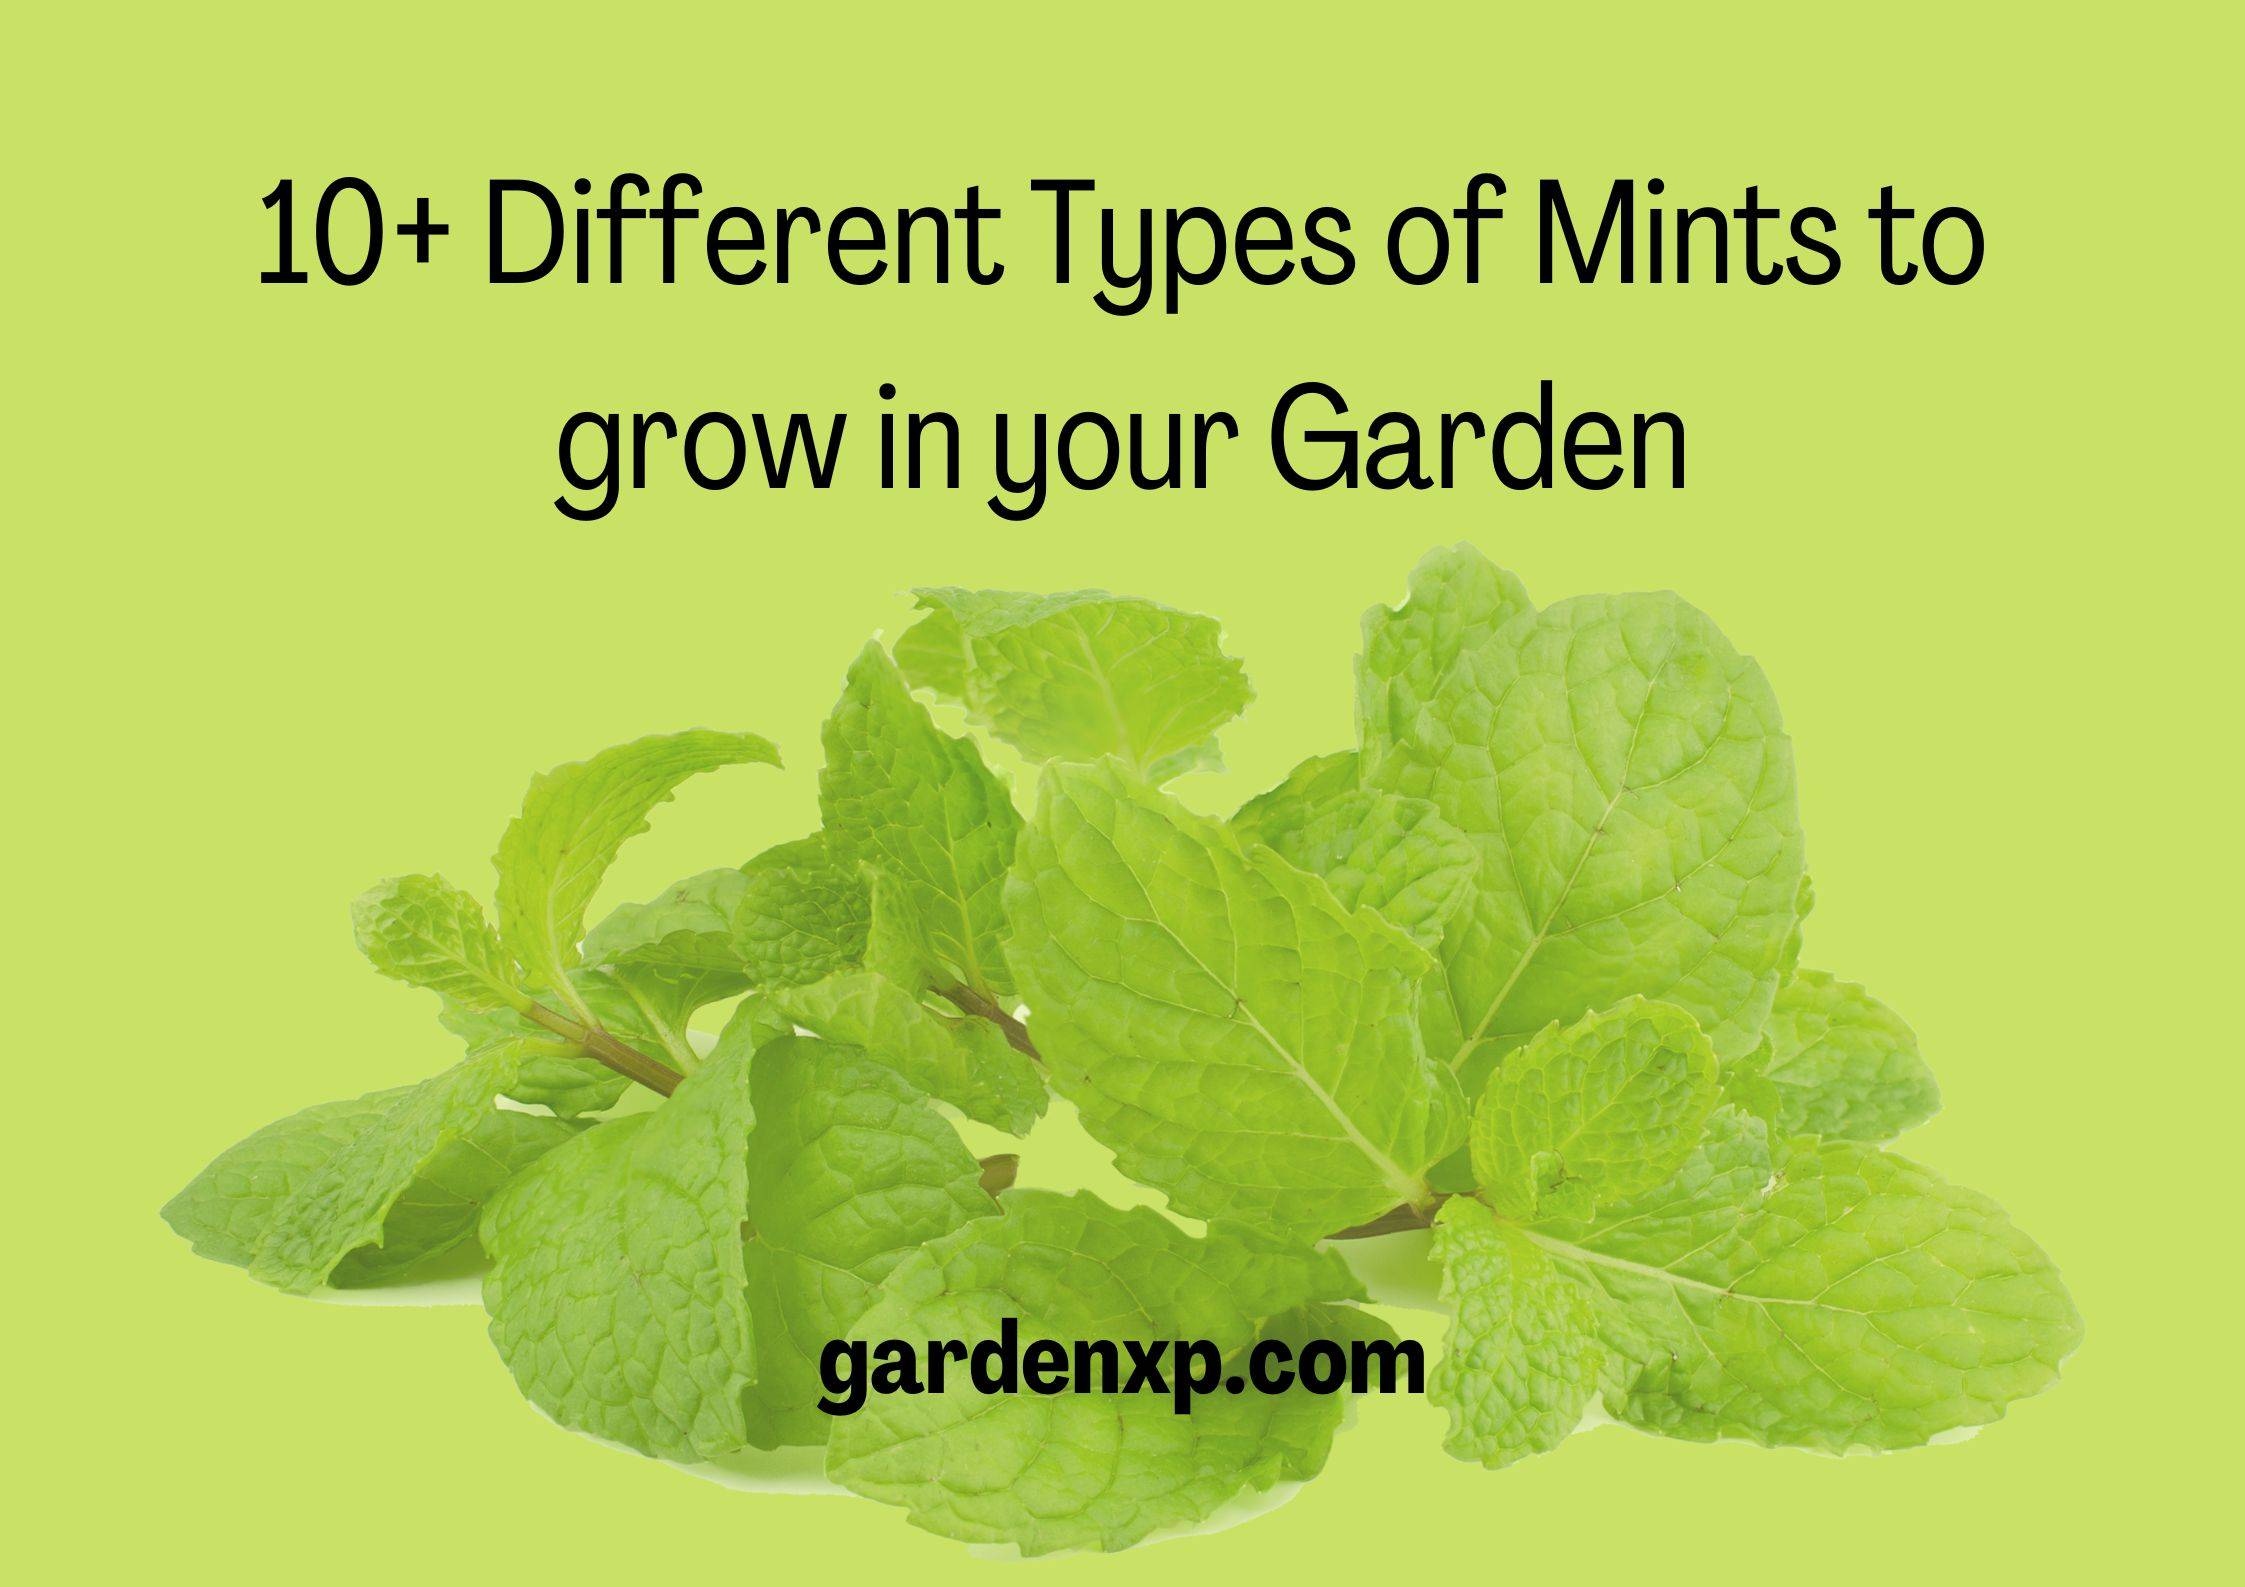 10+ Different Types of Mint to grow in your Garden